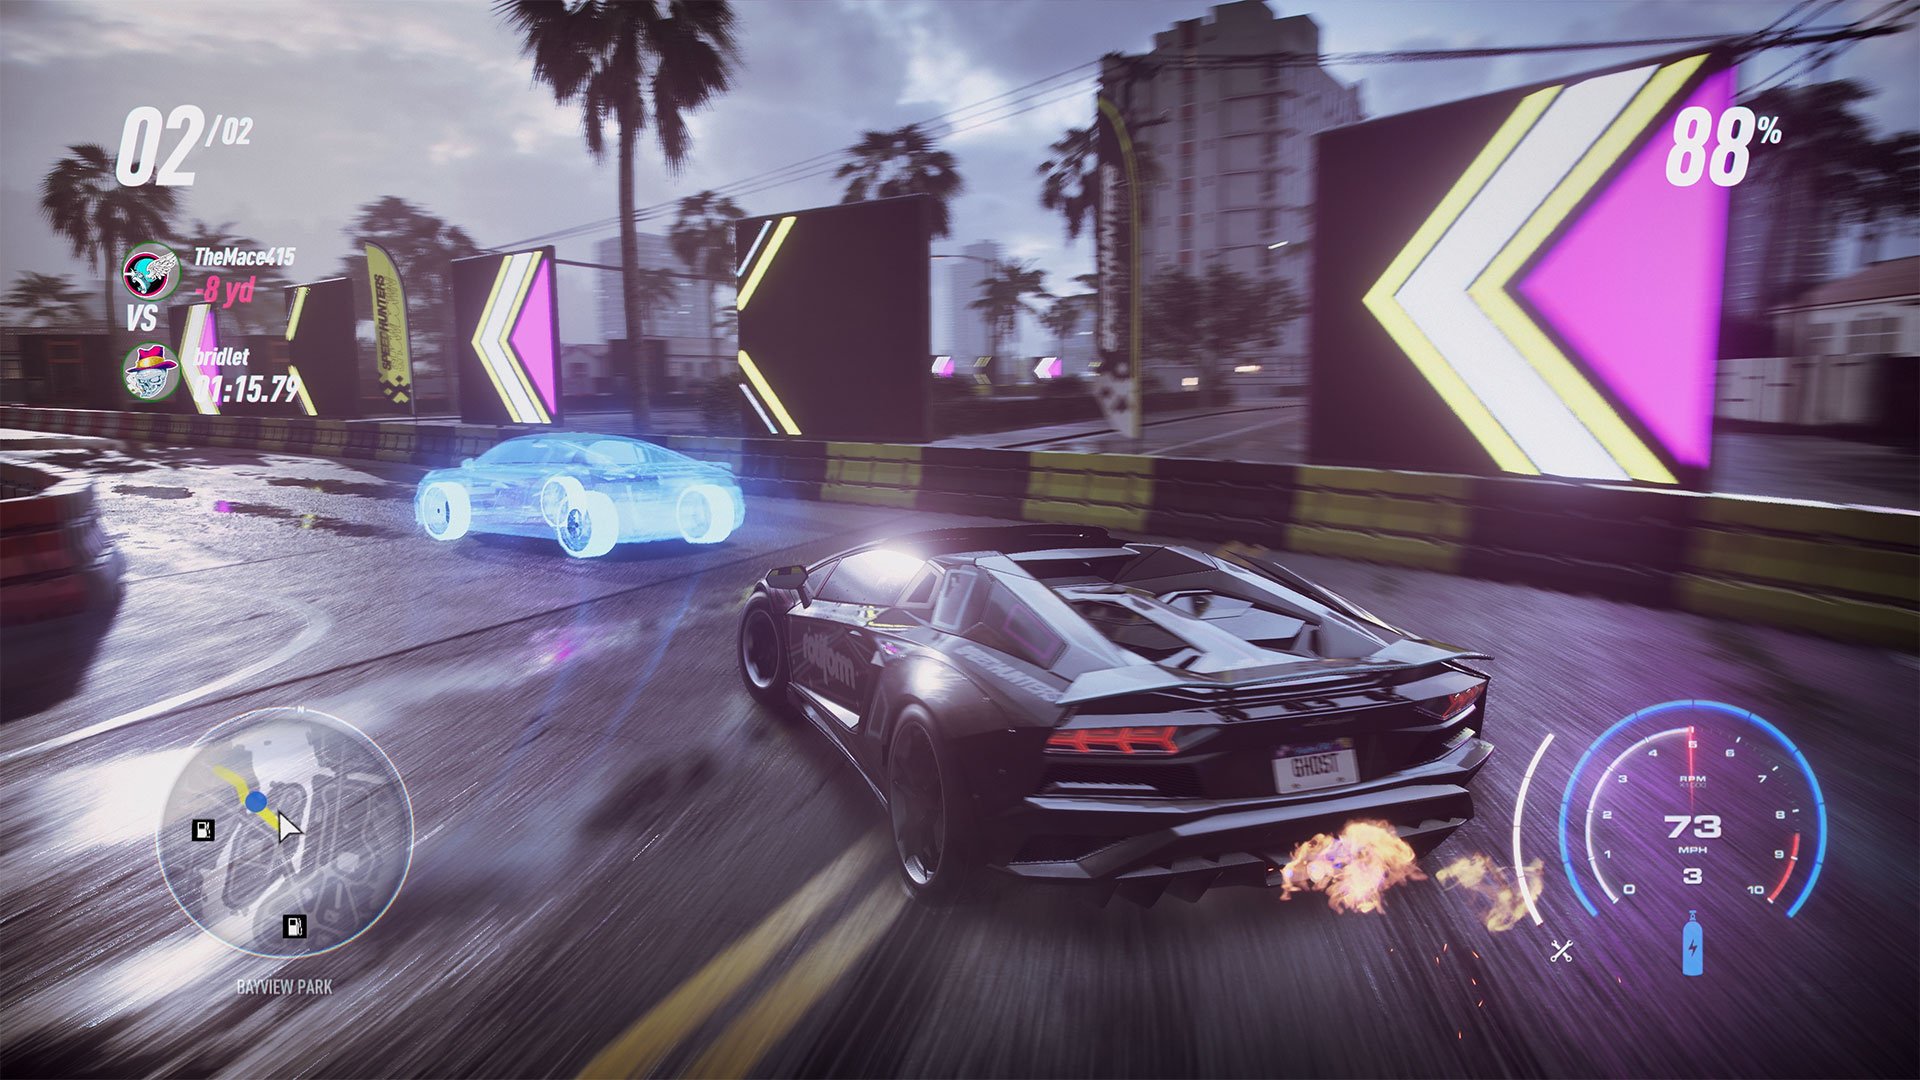 Need For Speed: Heat review